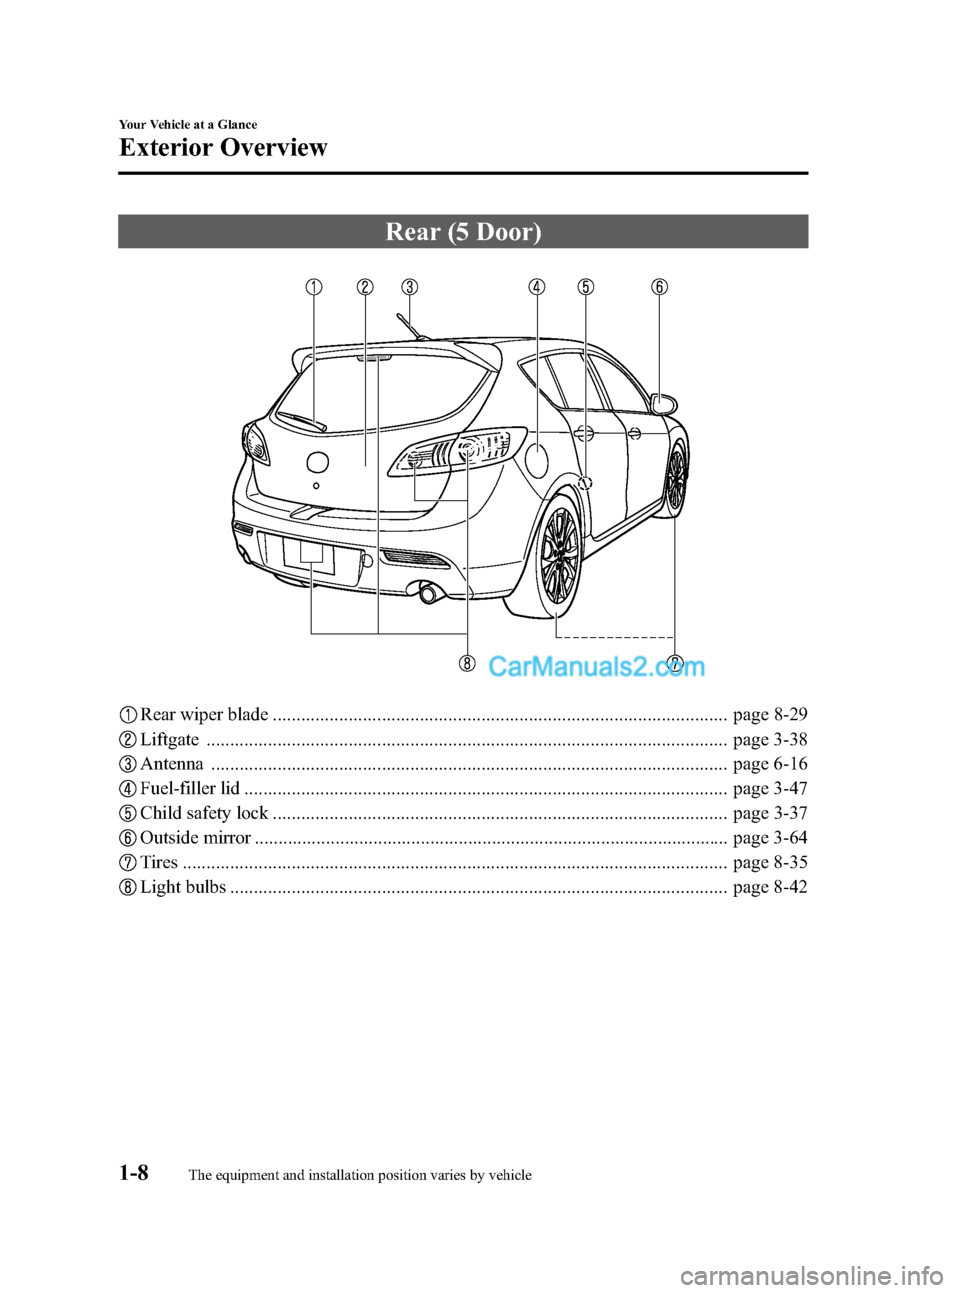 MAZDA MODEL MAZDASPEED 3 2011  Owners Manual (in English) Black plate (14,1)
Rear (5 Door)
Rear wiper blade ................................................................................................ page 8-29
Liftgate ..................................